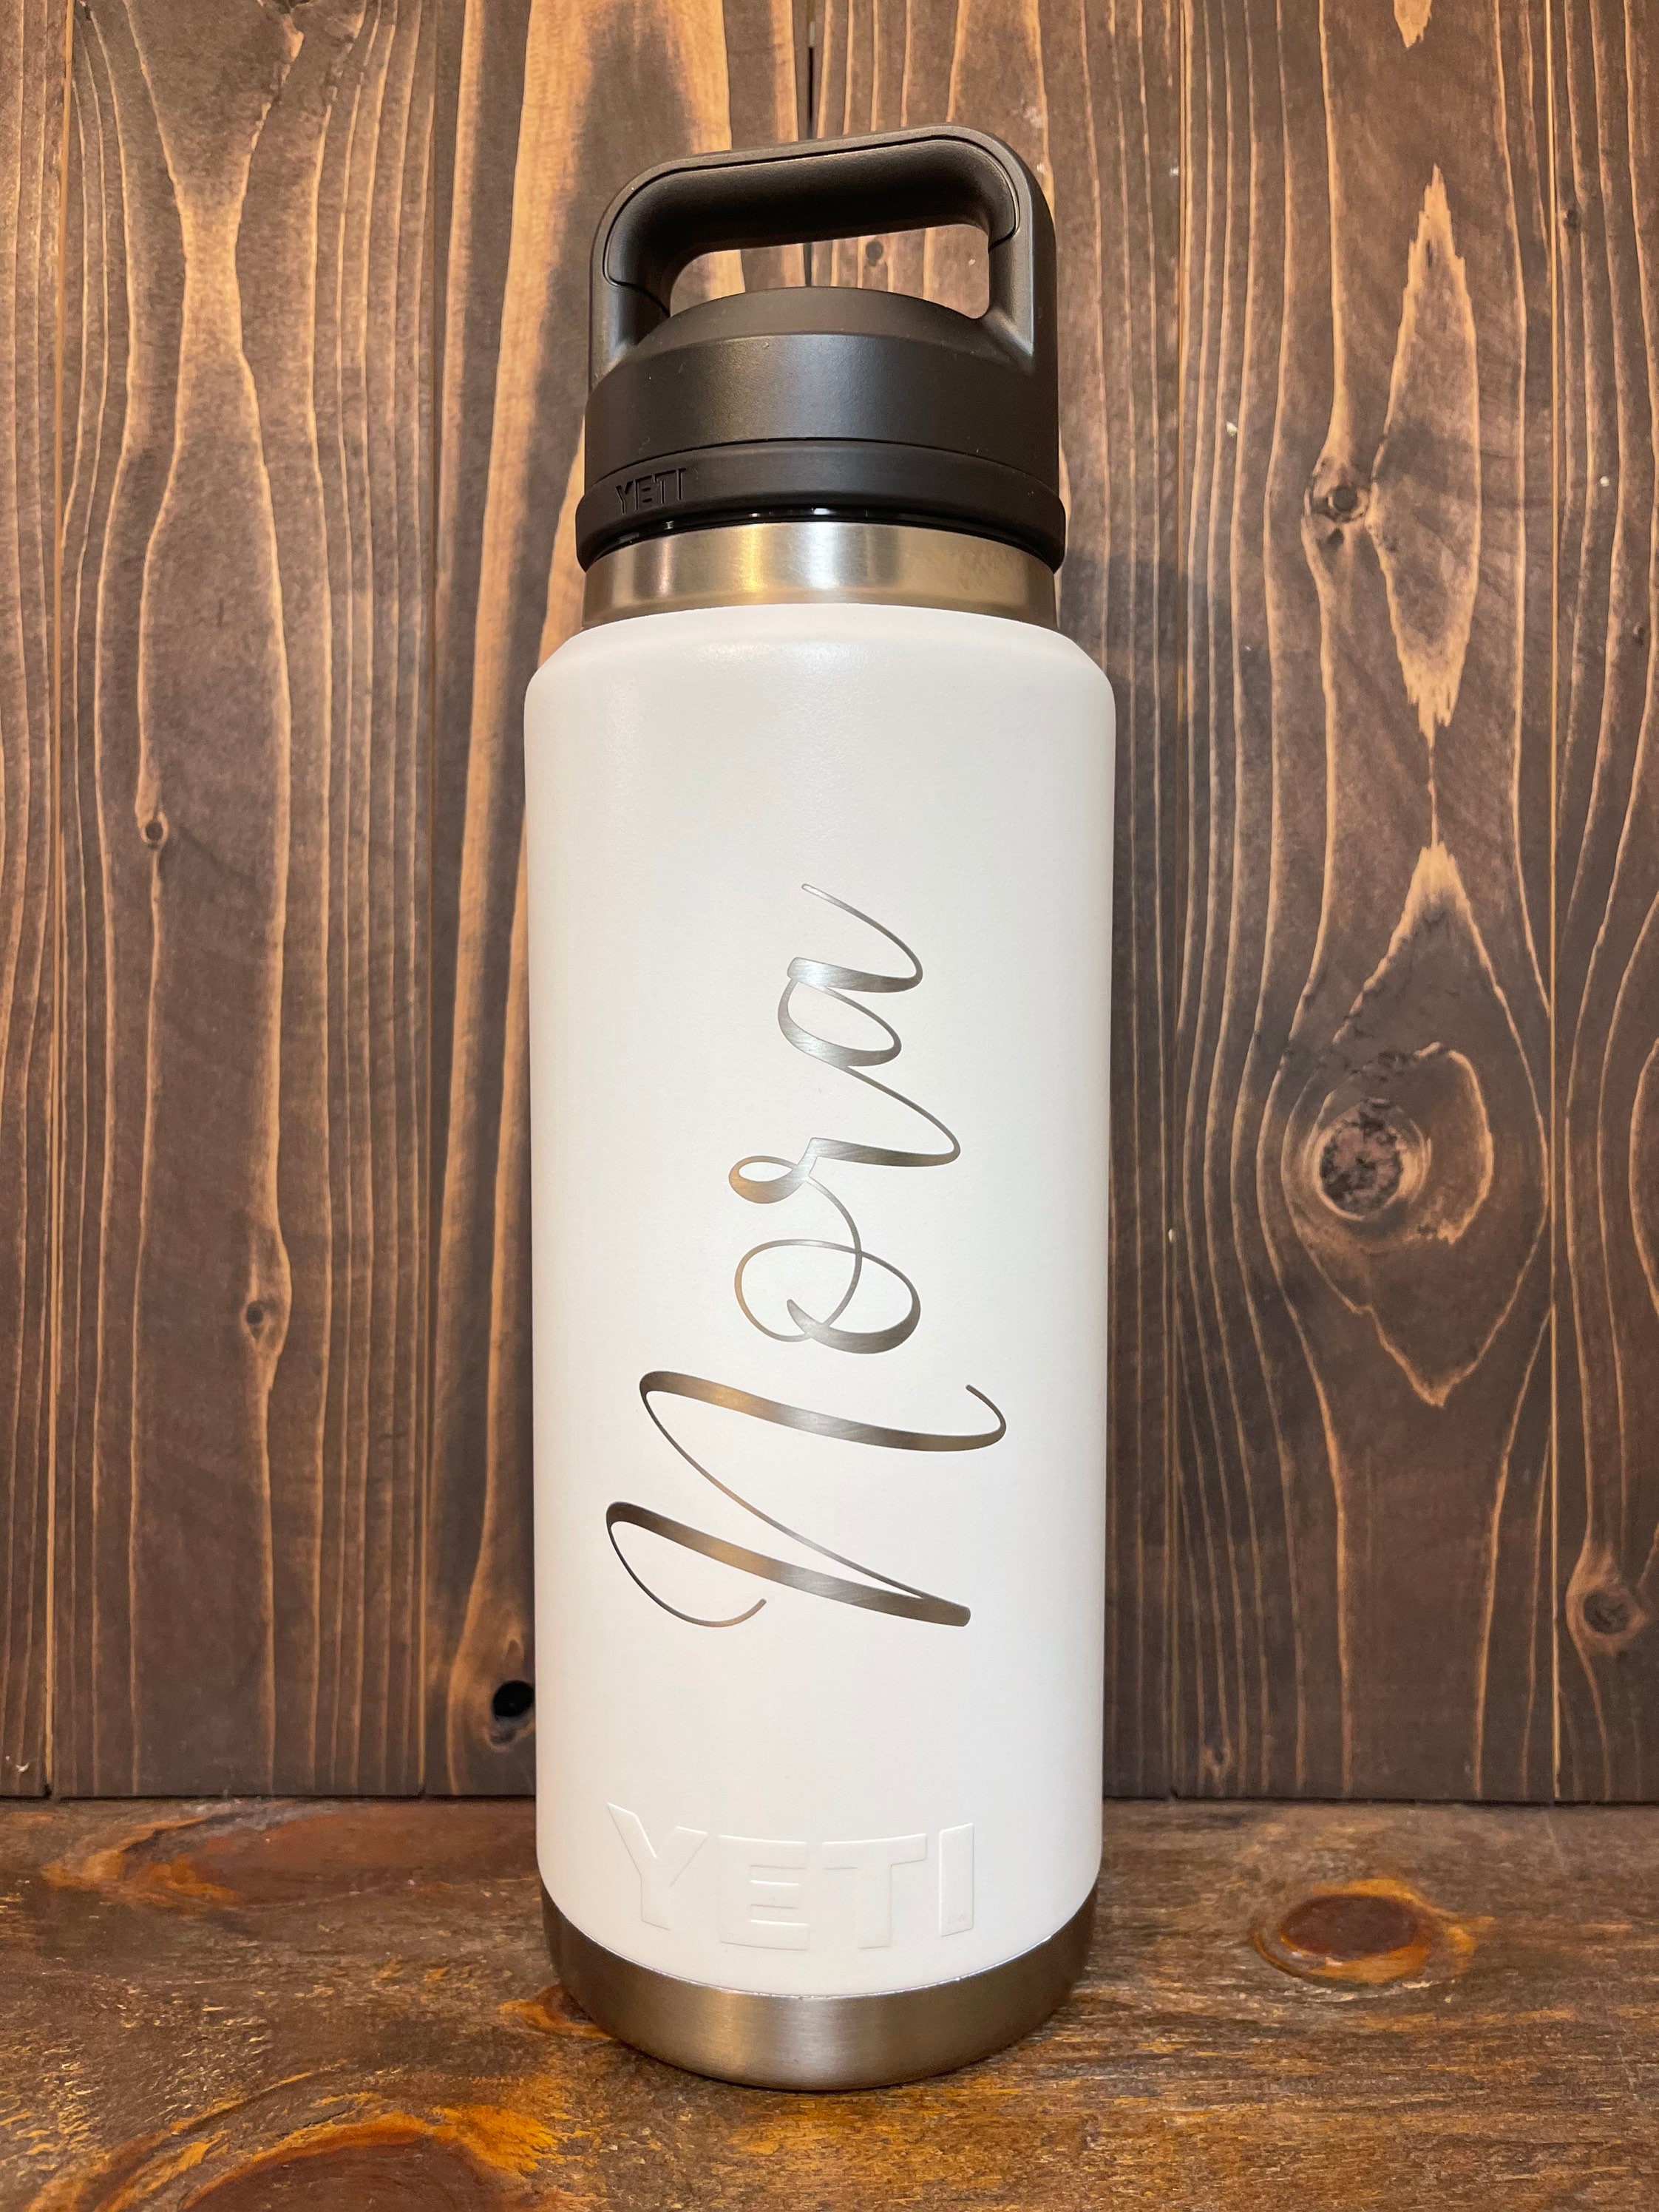 REAL YETI 36 Oz. Laser Engraved Prickly Pear Pink Yeti Rambler Bottle With  Chug Cap Personalized Vacuum Insulated YETI 